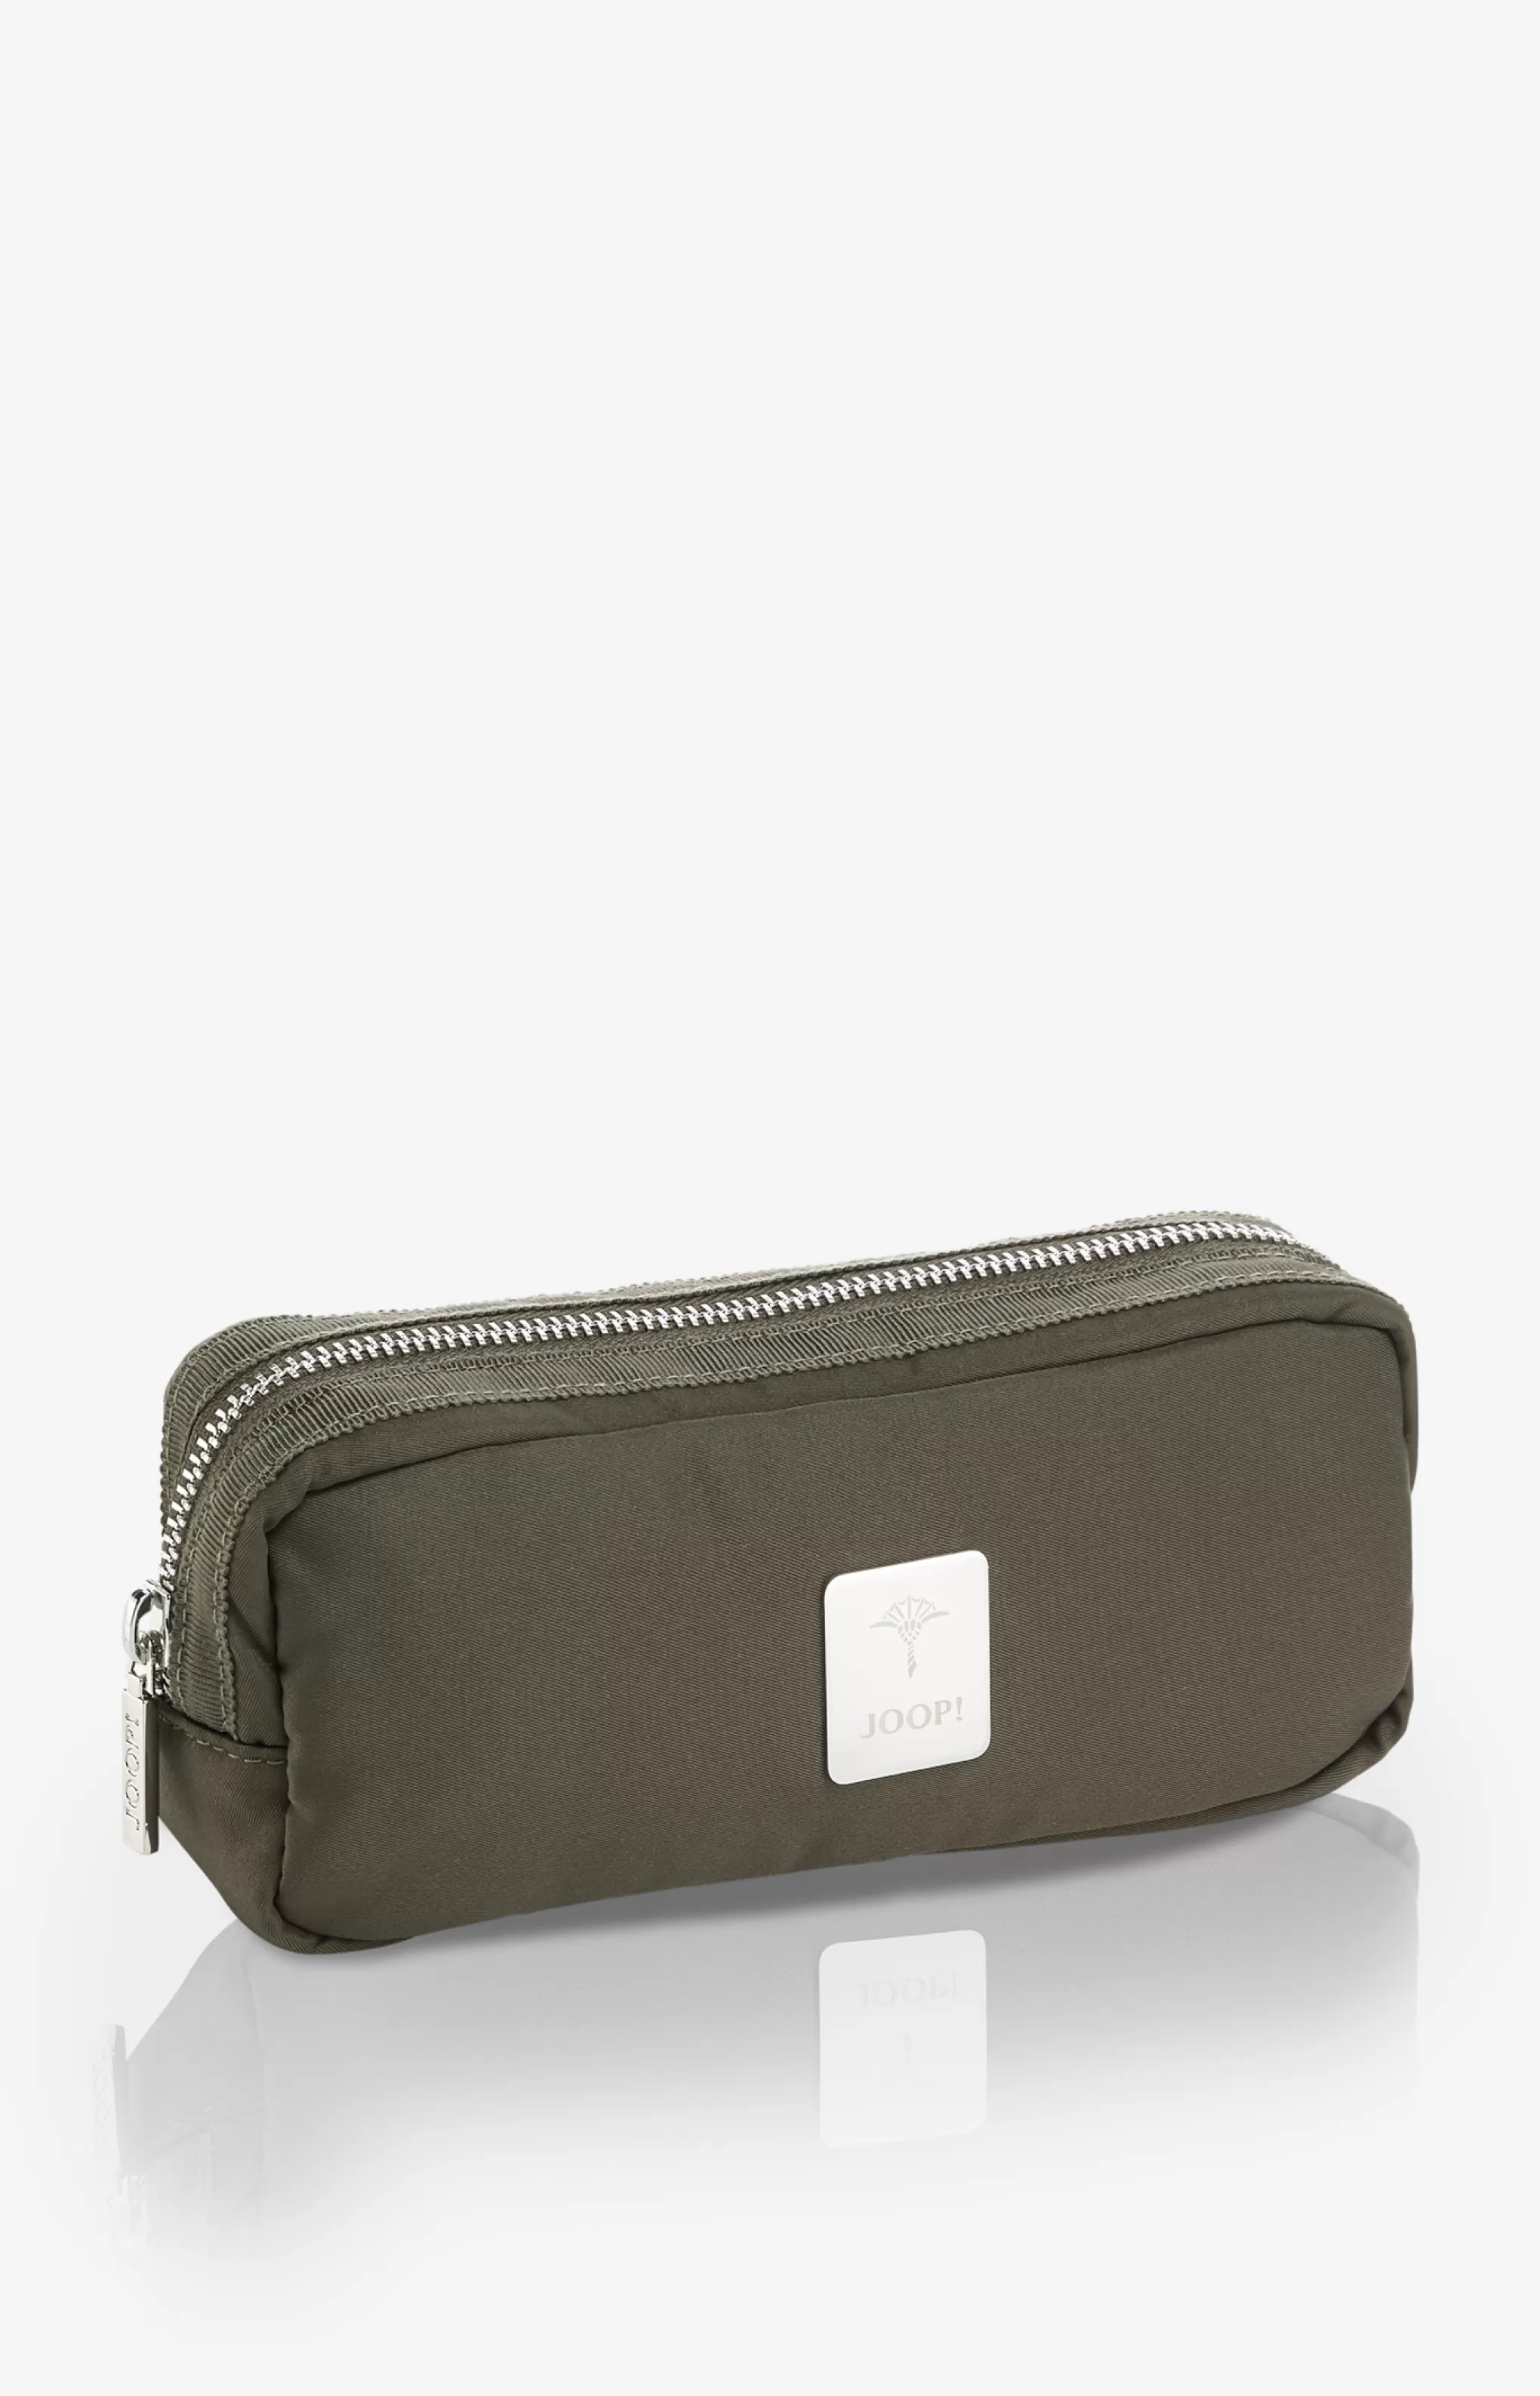 Bathroom Accessories | Discover Everything | Luggage*JOOP Bathroom Accessories | Discover Everything | Luggage Air makeup bag,